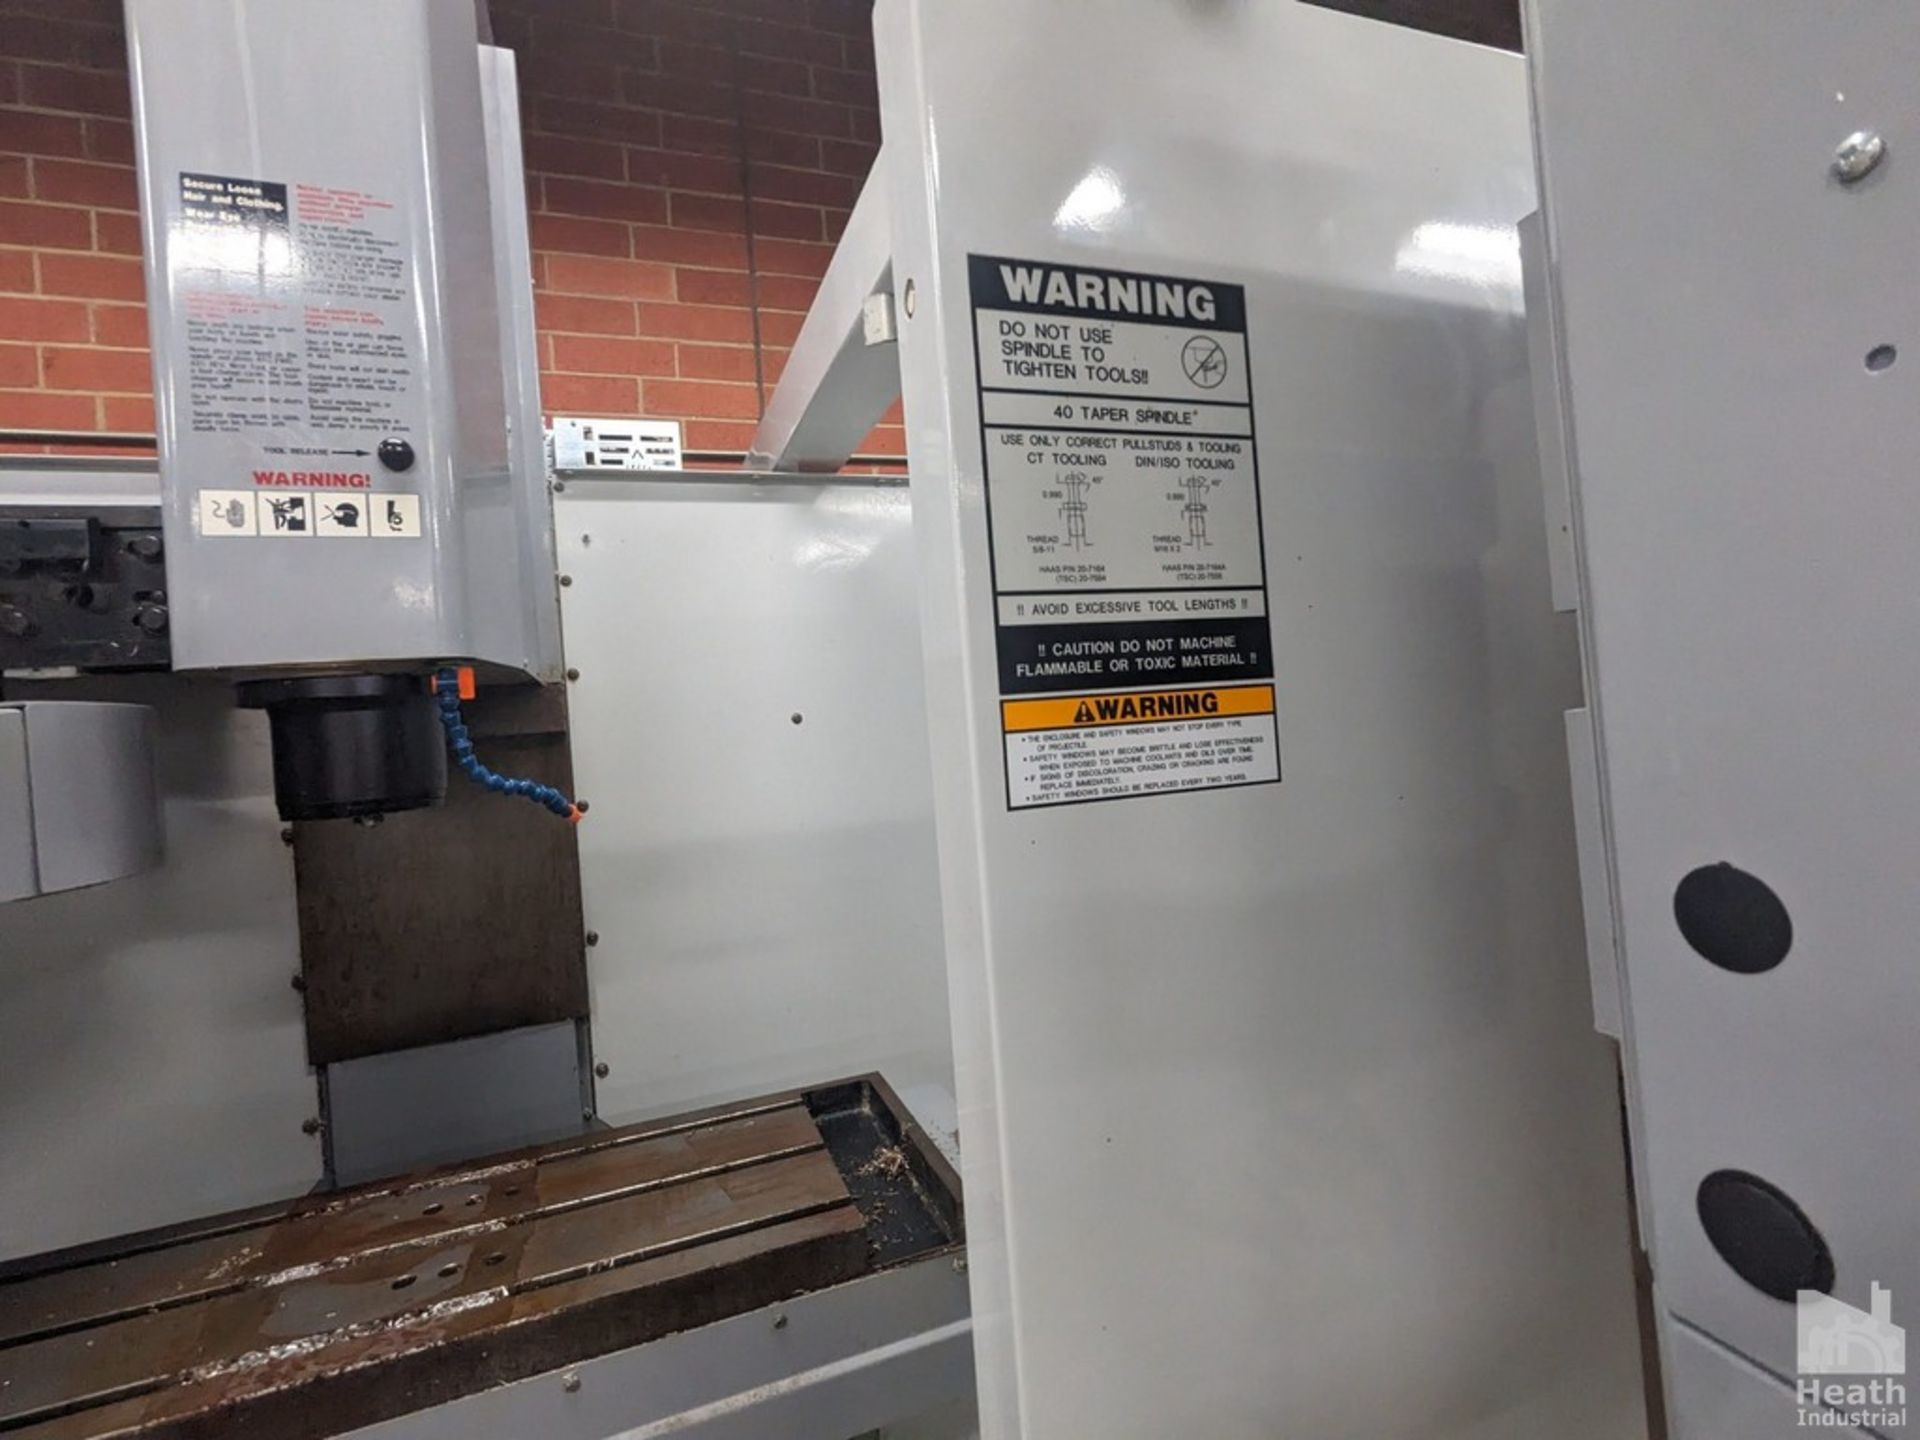 HAAS 3-AXIS MODEL MINI MILL CNC VERTICAL MACHINING CENTER, S/N 42775(NEW 2005) 12"X29" TABLE, 16" - Image 8 of 8